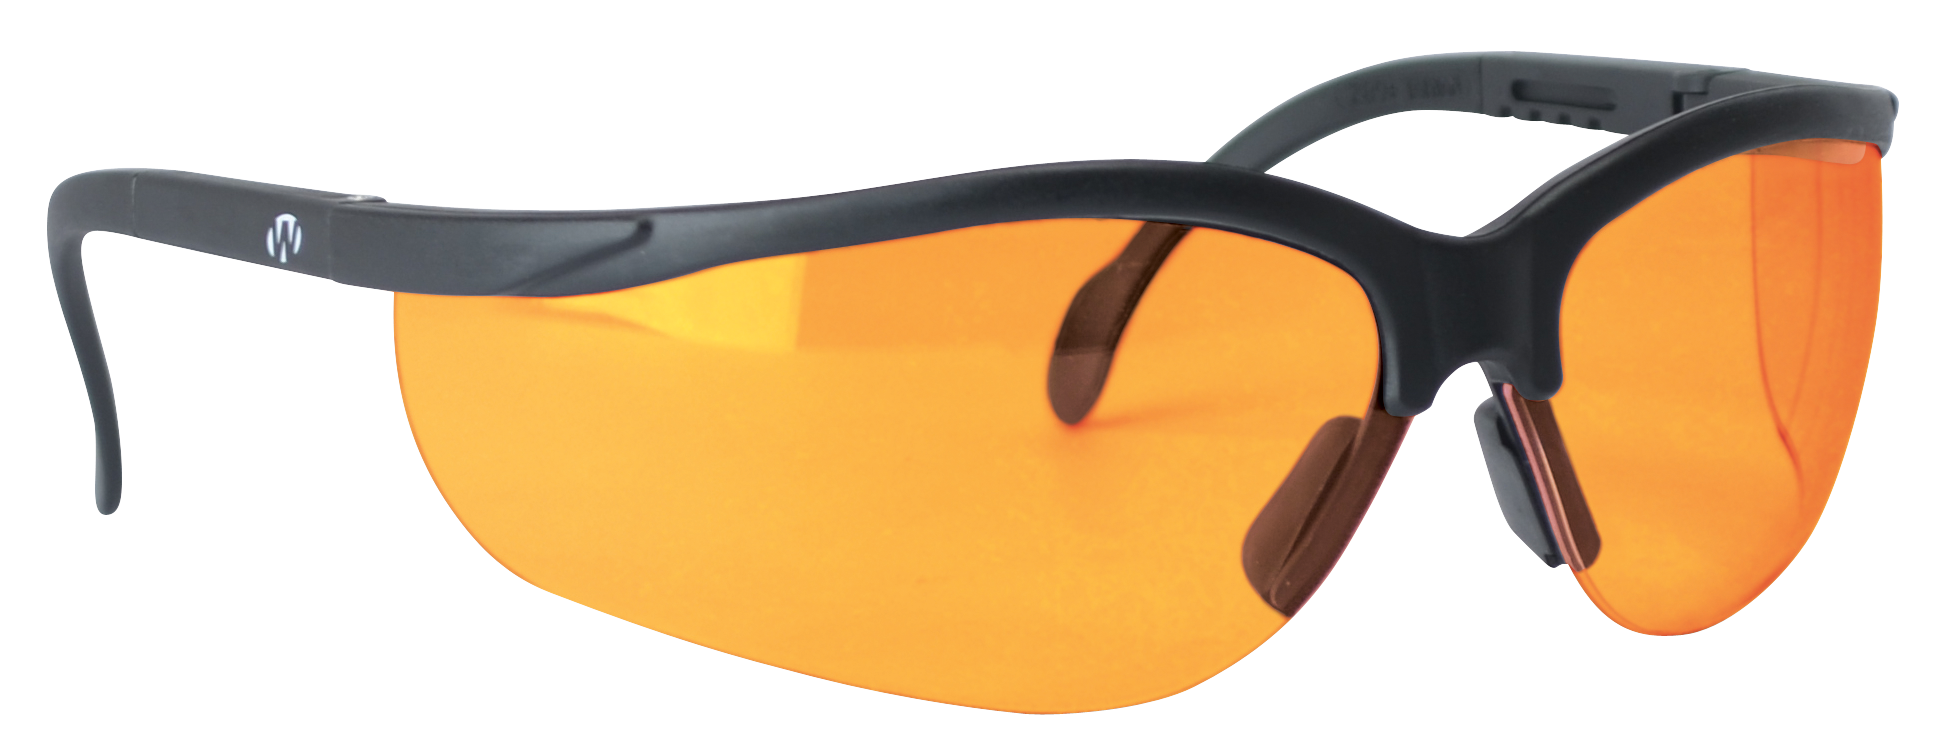 Sunglasses PNG Pic Background